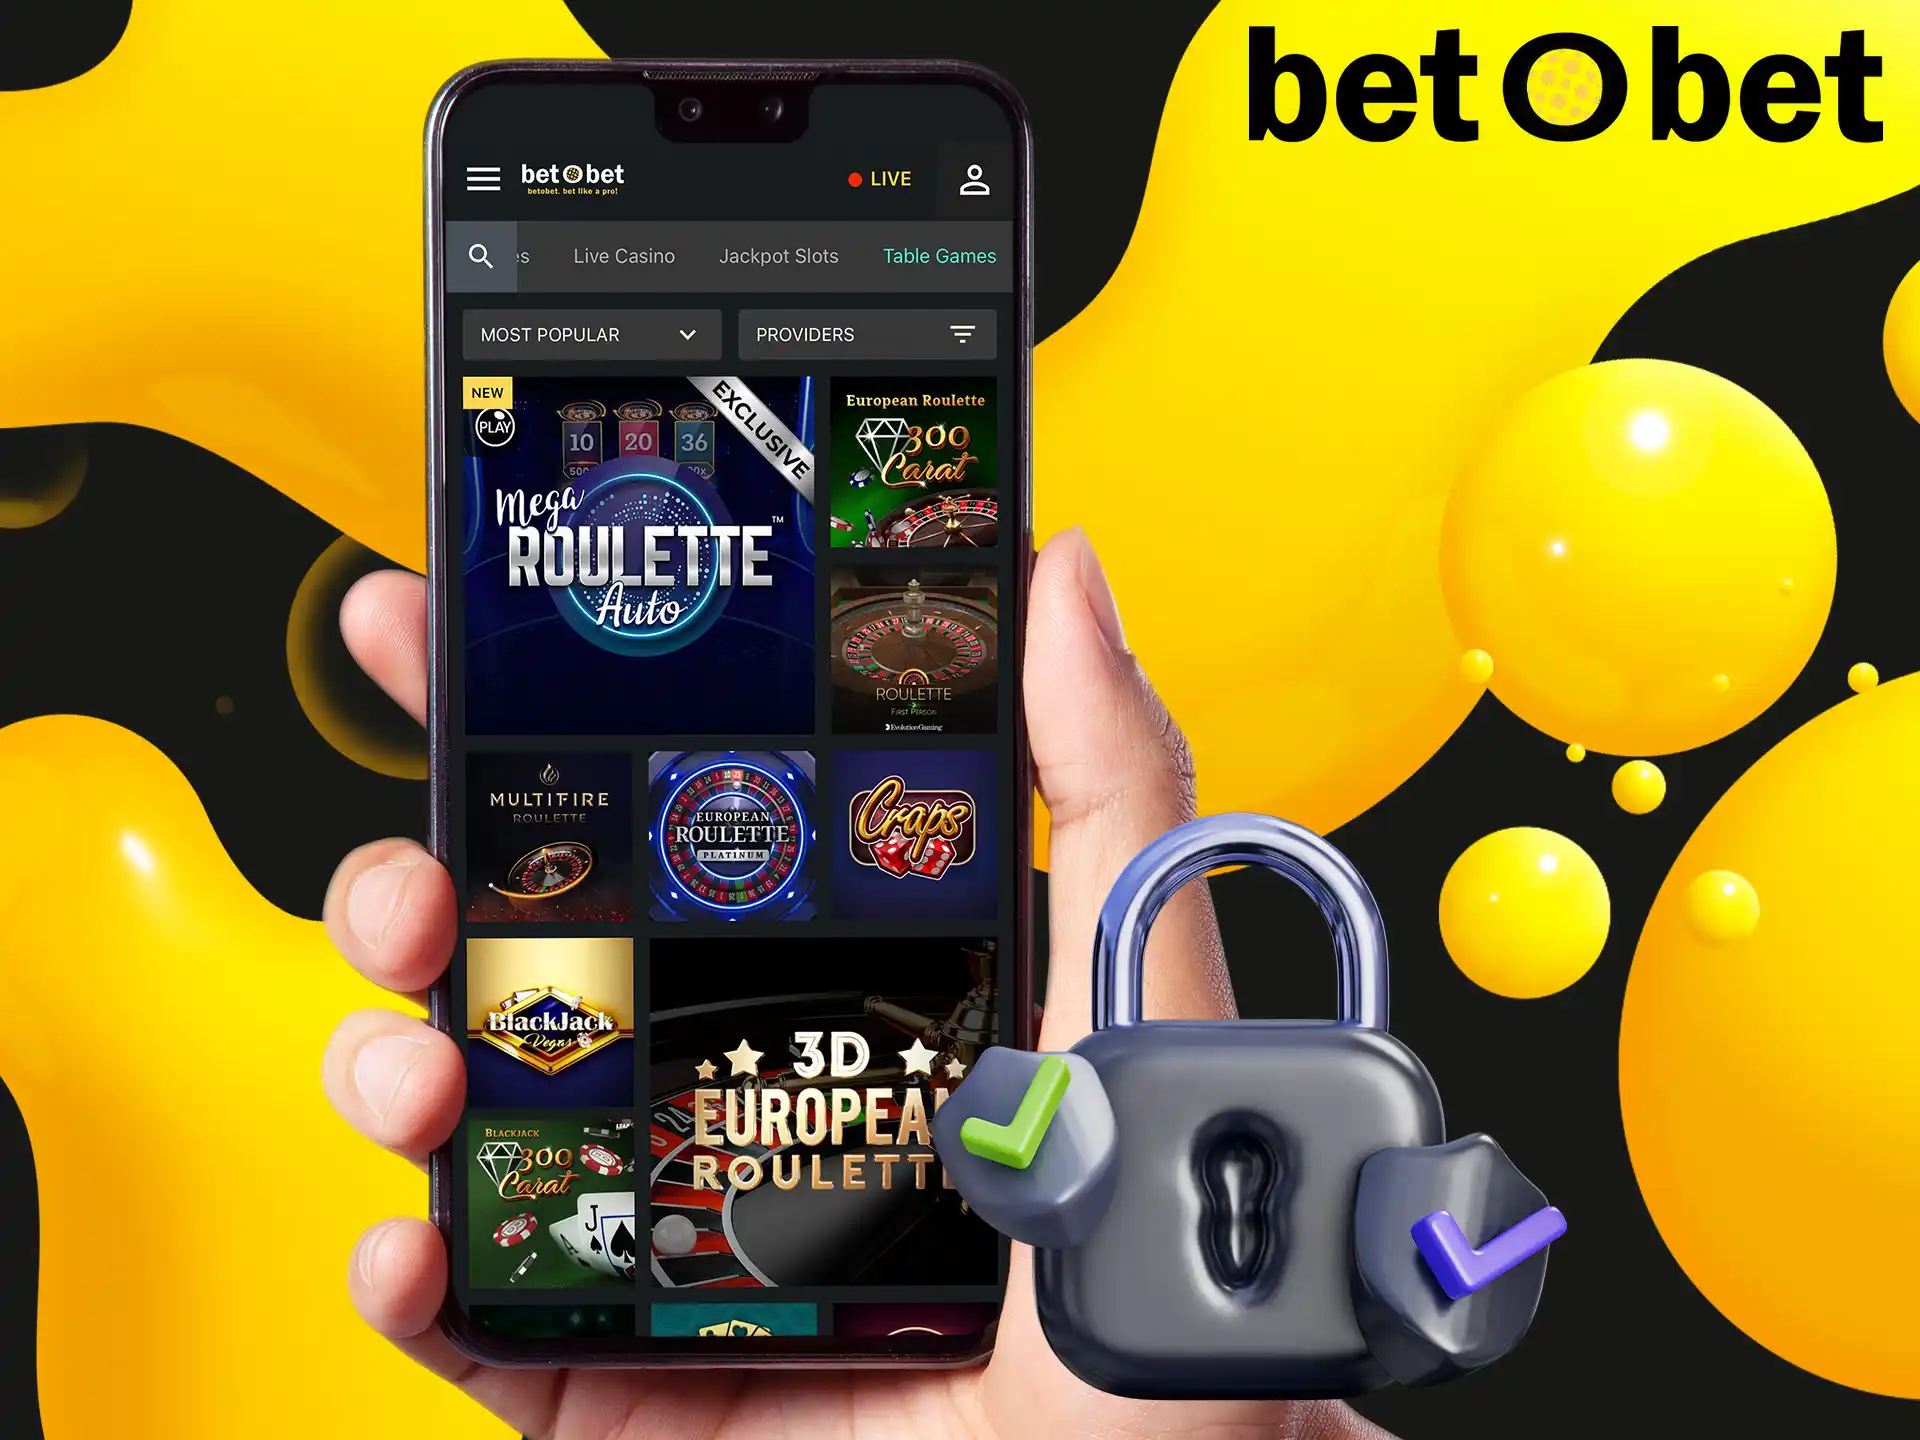 Betobet gambling company has a good security system for its customers.